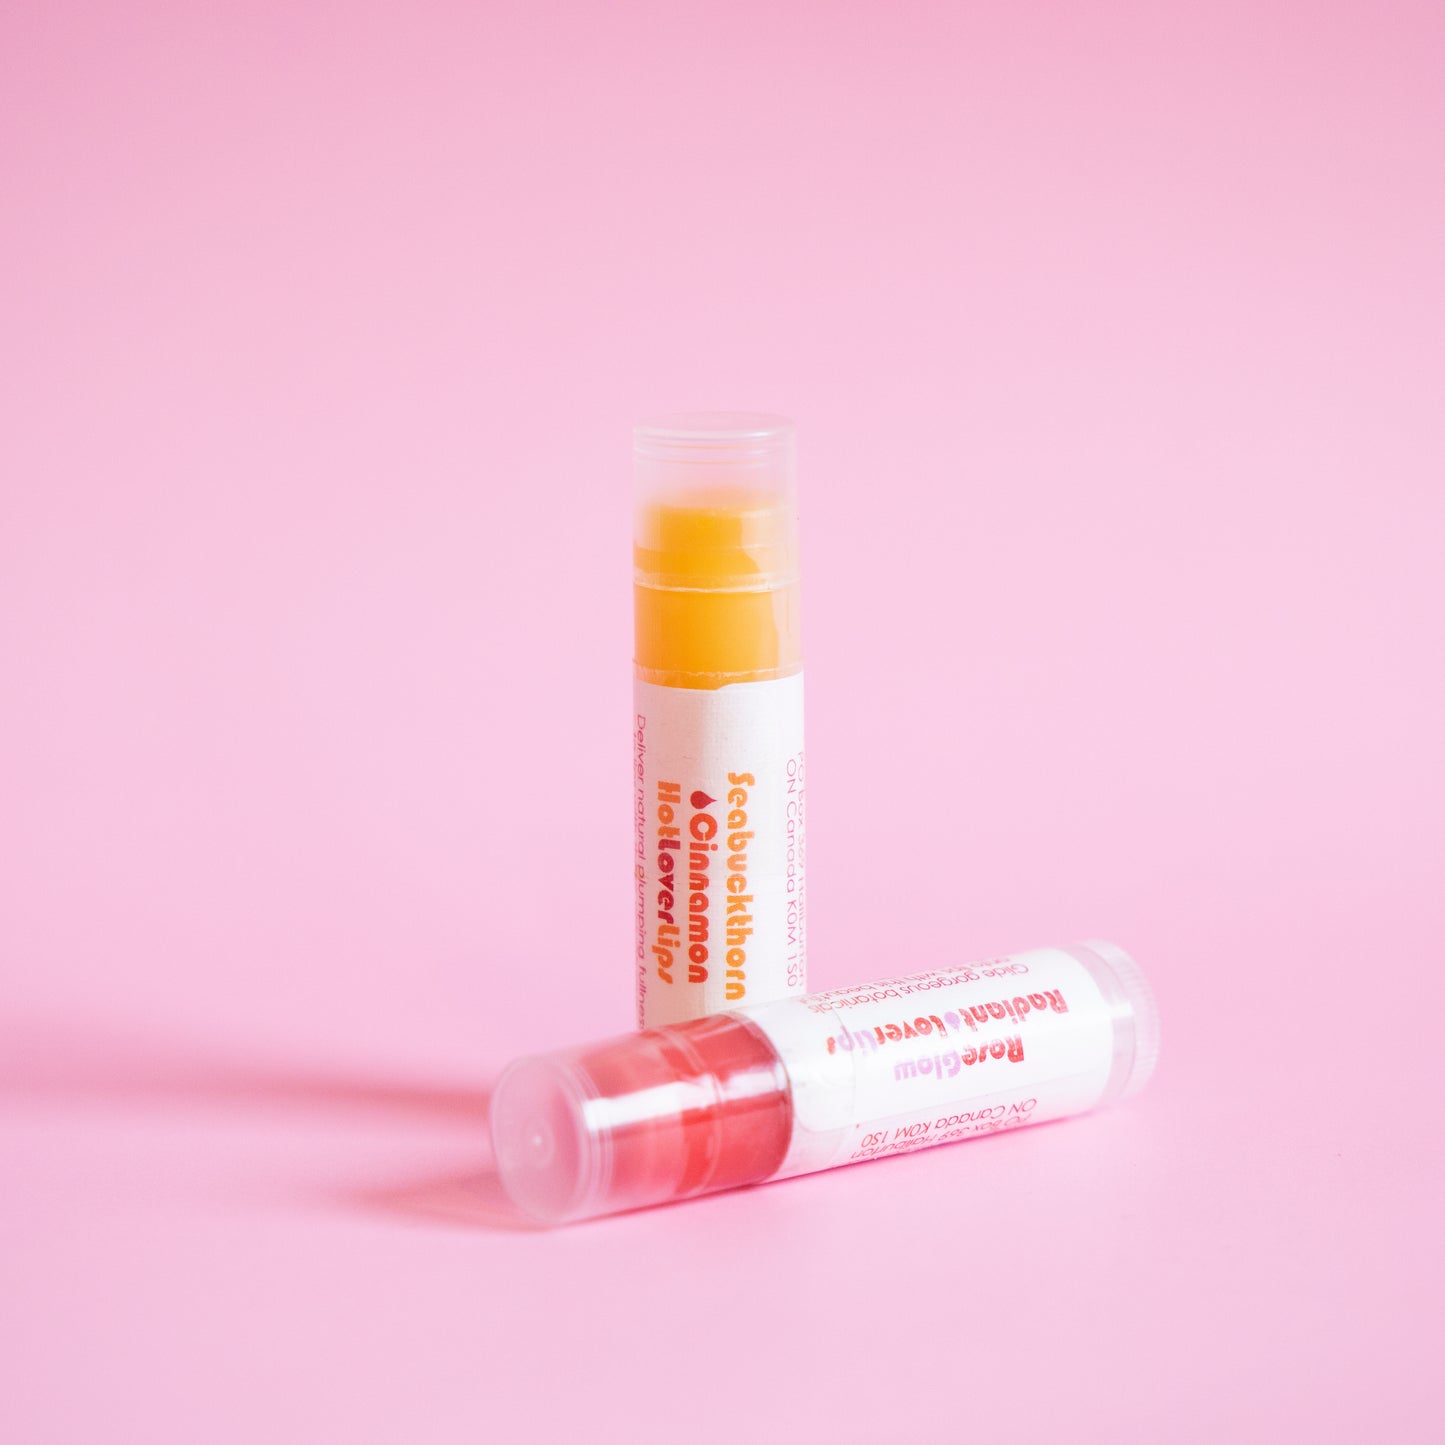 Living Libations Rose Glow Radiant Lover Lips balm. Available at Easy Tiger Toronto.